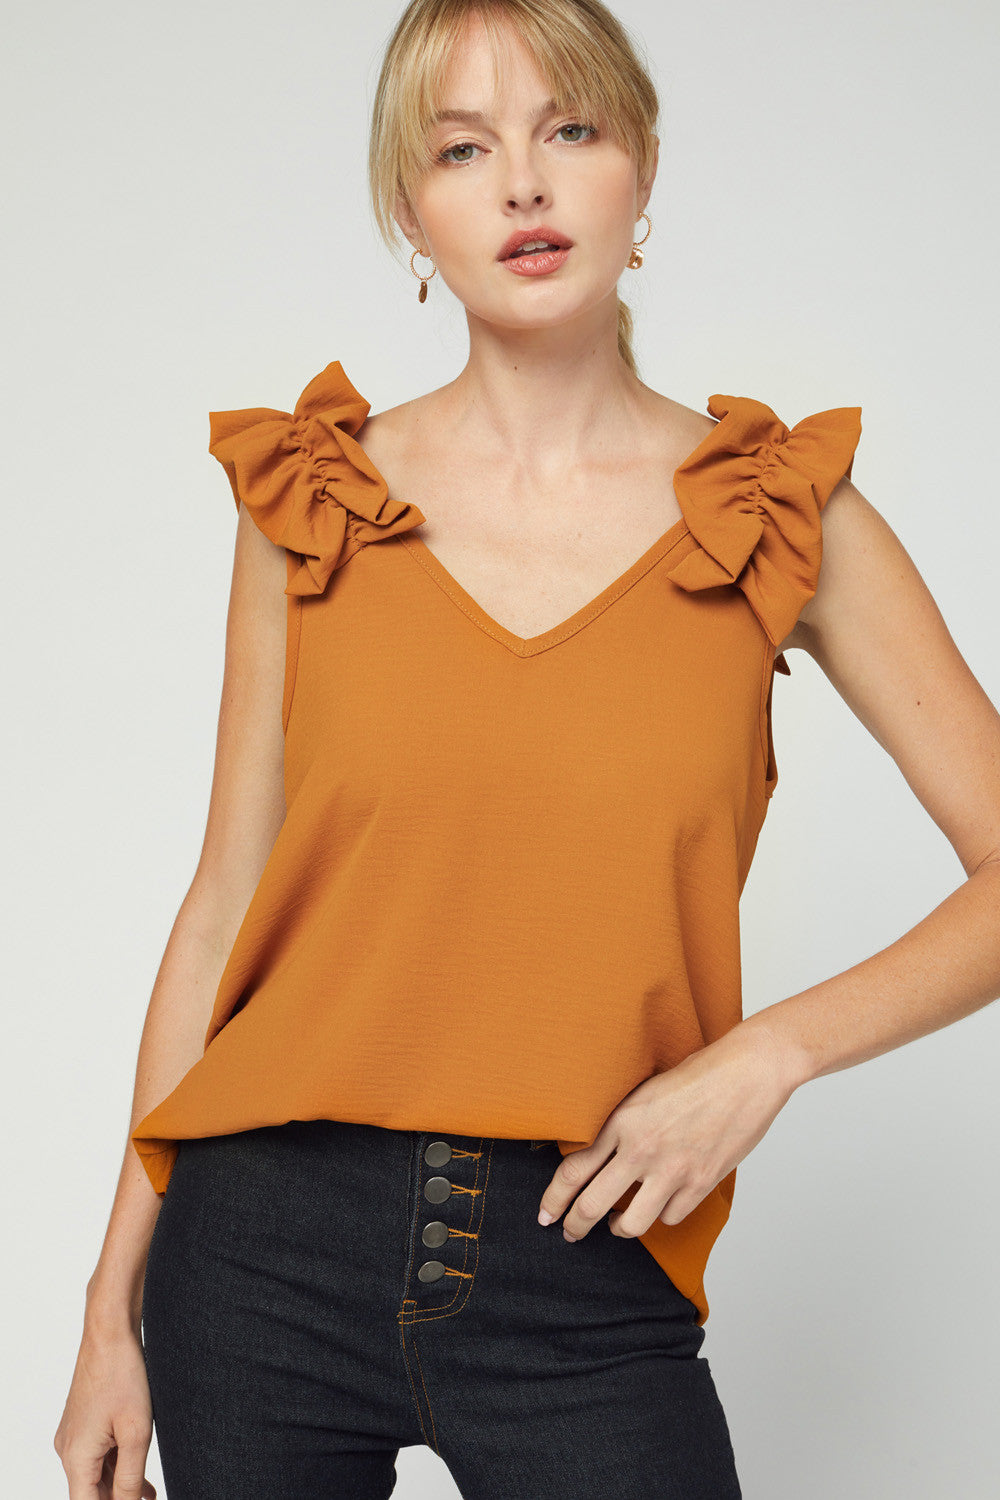 Fall fashion 2020 in camel colored v-neck sleeveless blouse with ruffle at strap.